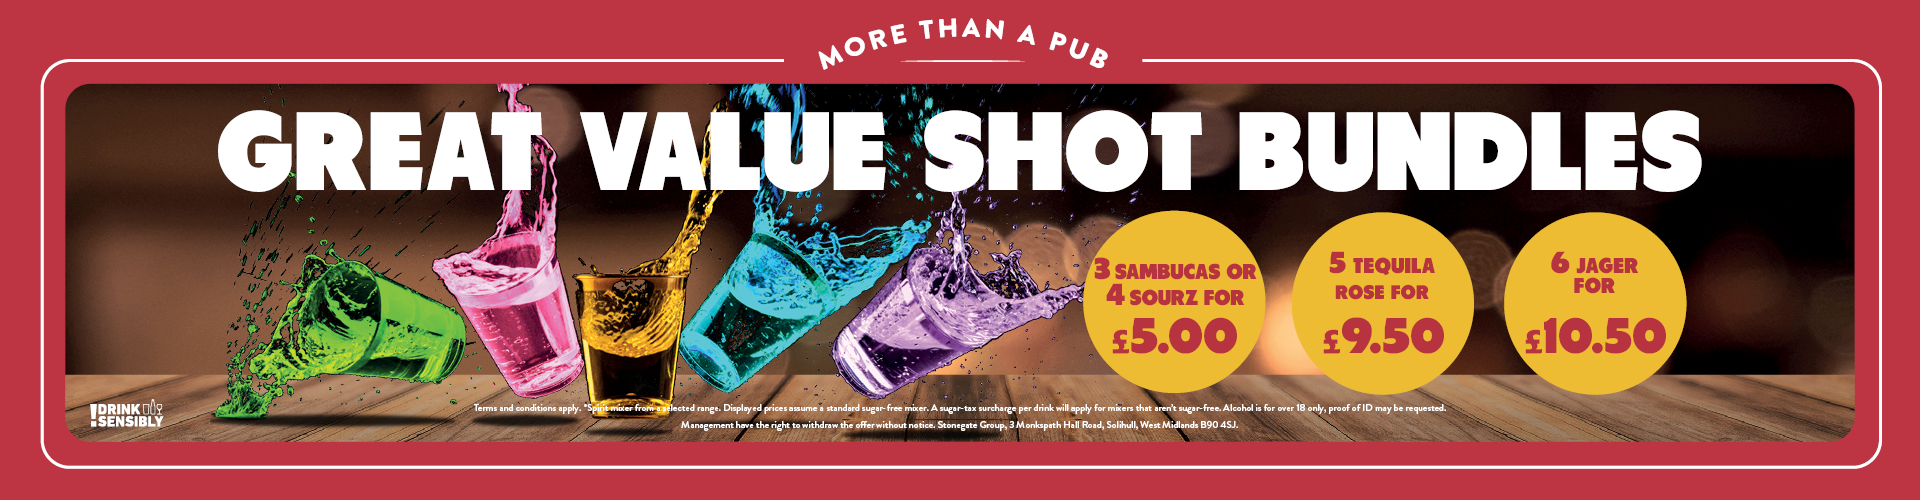 Shot bundle drink offers at your local Craft Union Pub